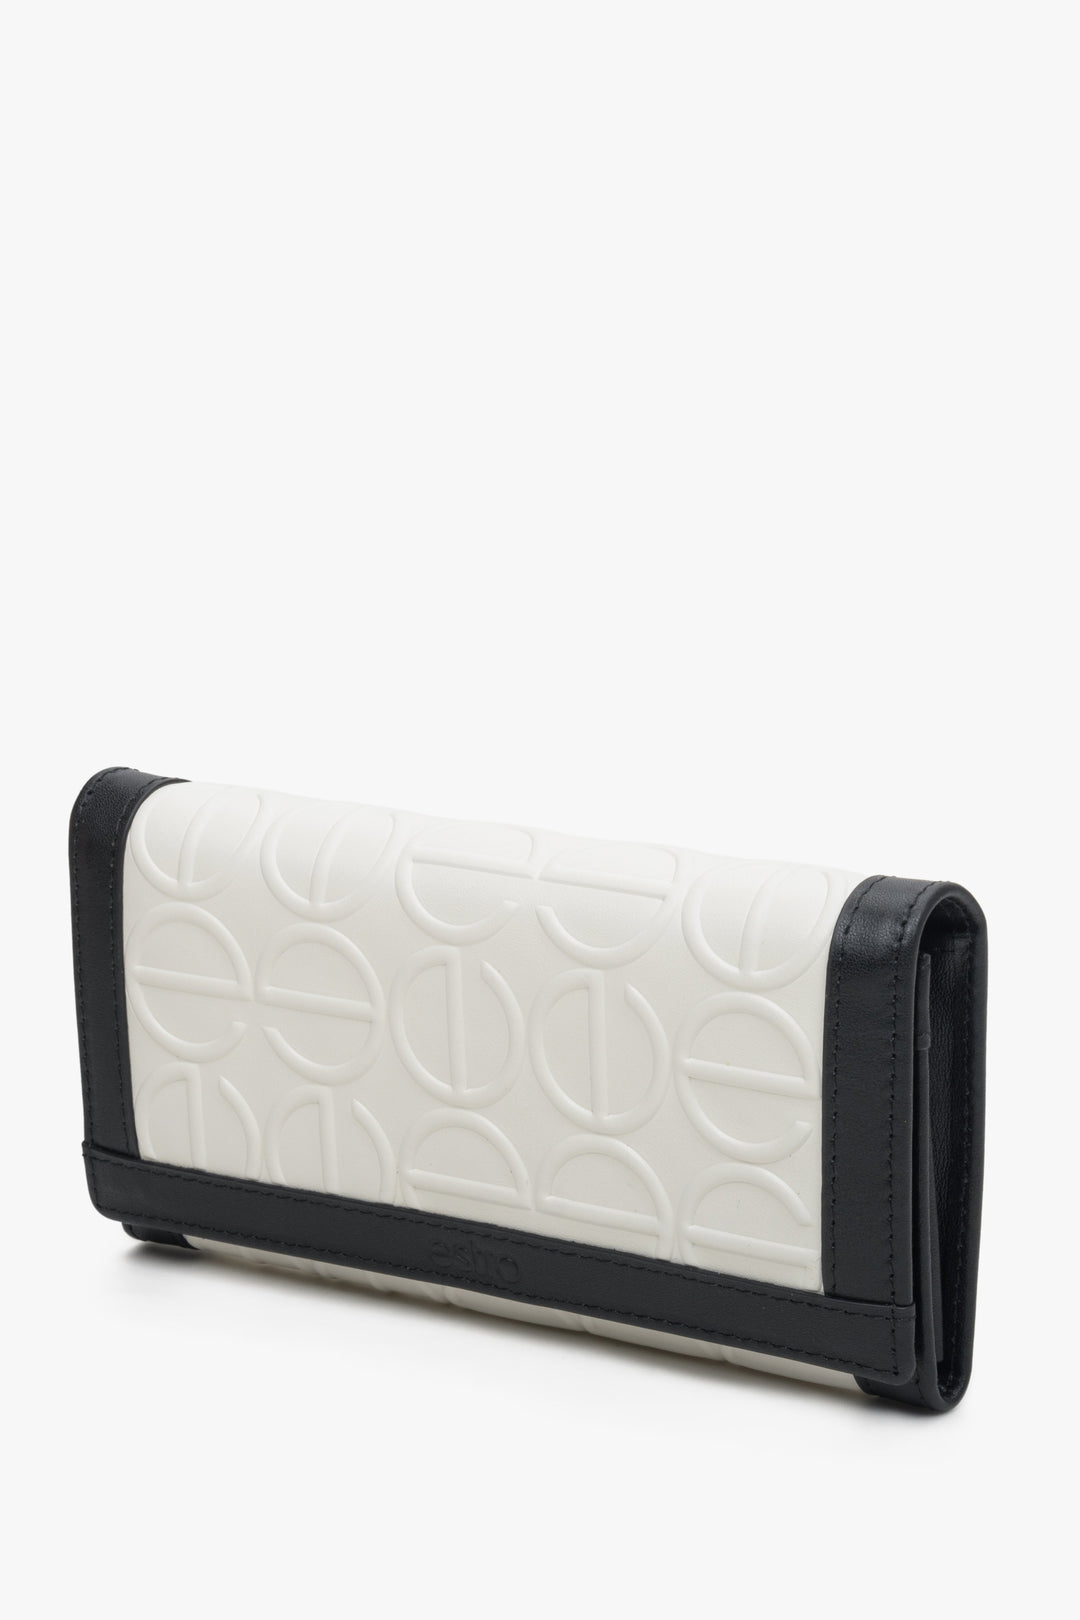 Large, women's black and white  leather wallet by Estro.